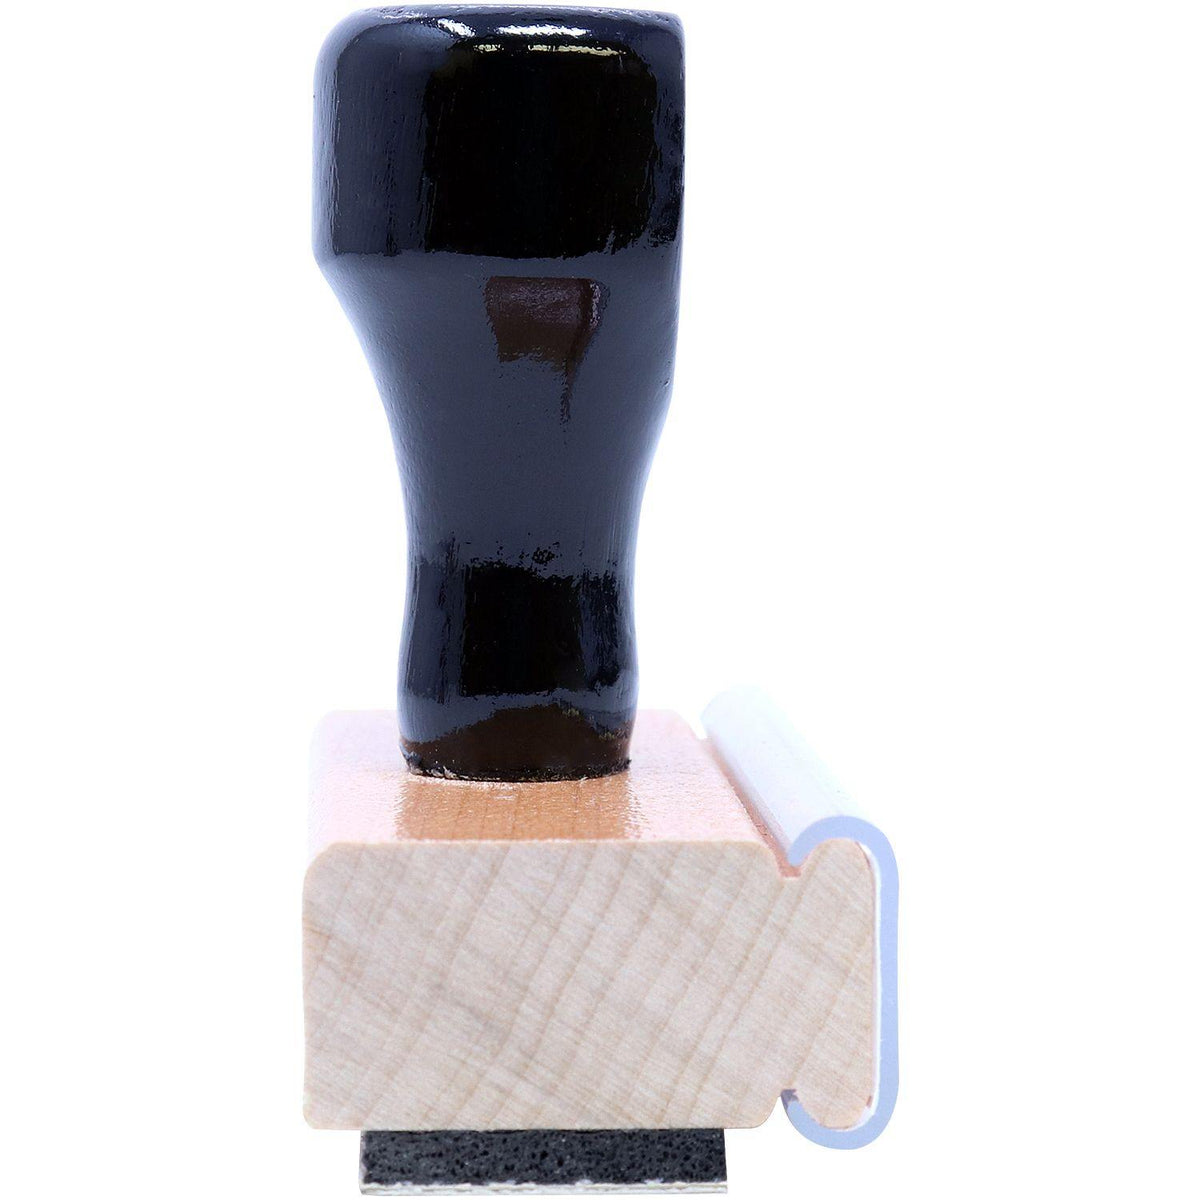 Large Times Faxed with Line Rubber Stamp - Engineer Seal Stamps - Brand_Acorn, Impression Size_Large, Stamp Type_Regular Stamp, Type of Use_Business, Type of Use_General, Type of Use_Office